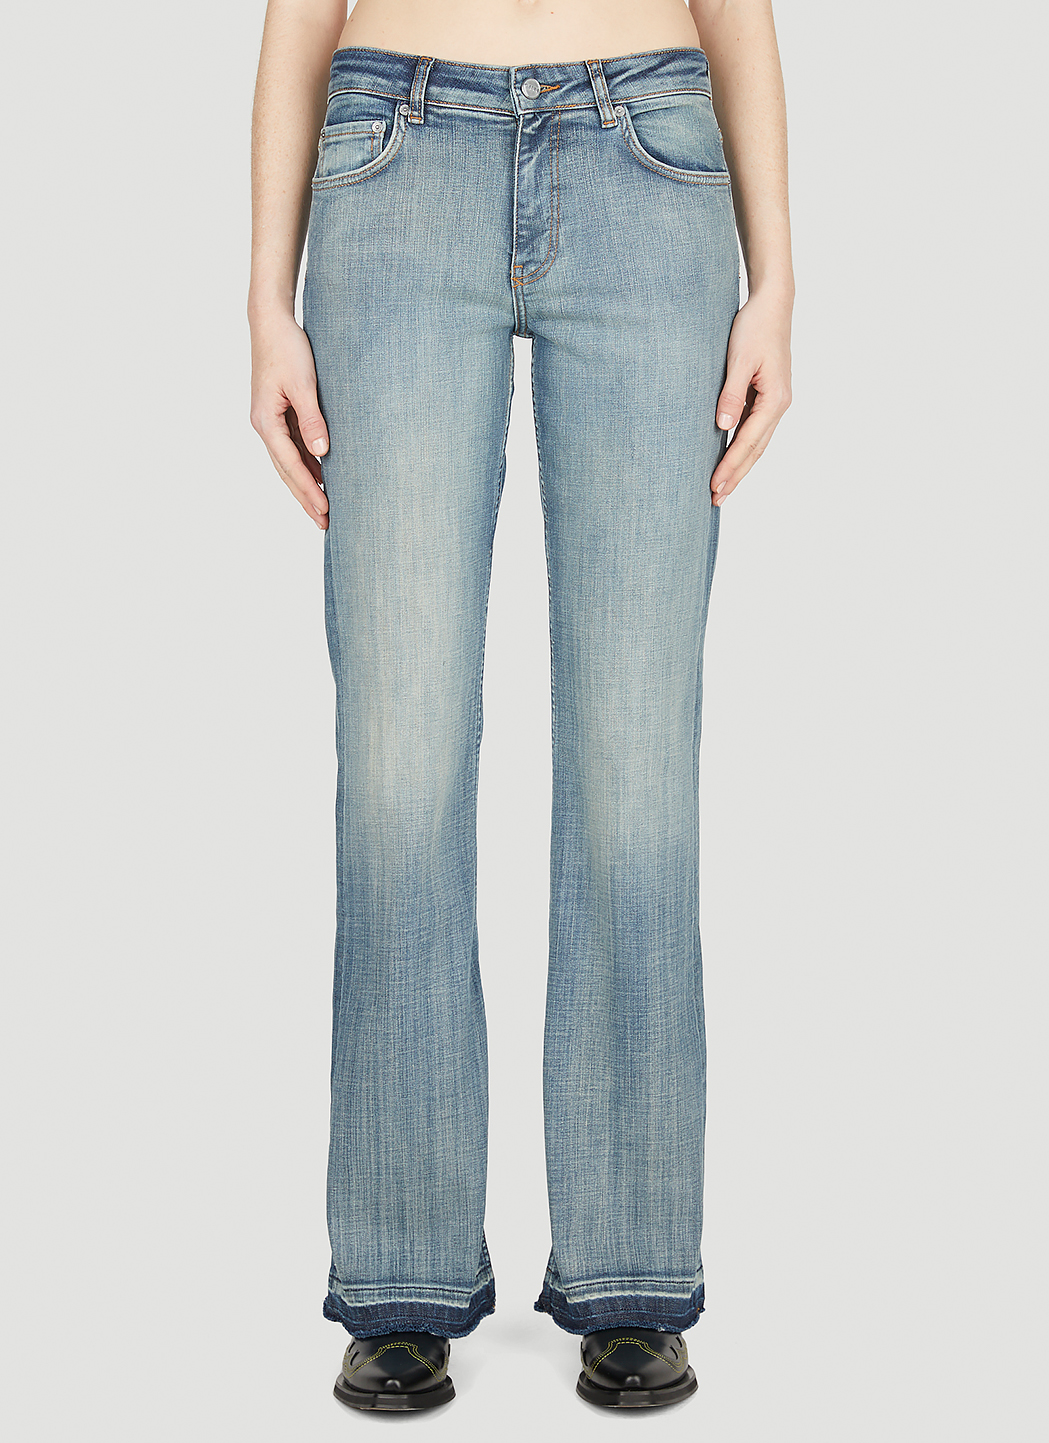 Low Rise Washed Jeans